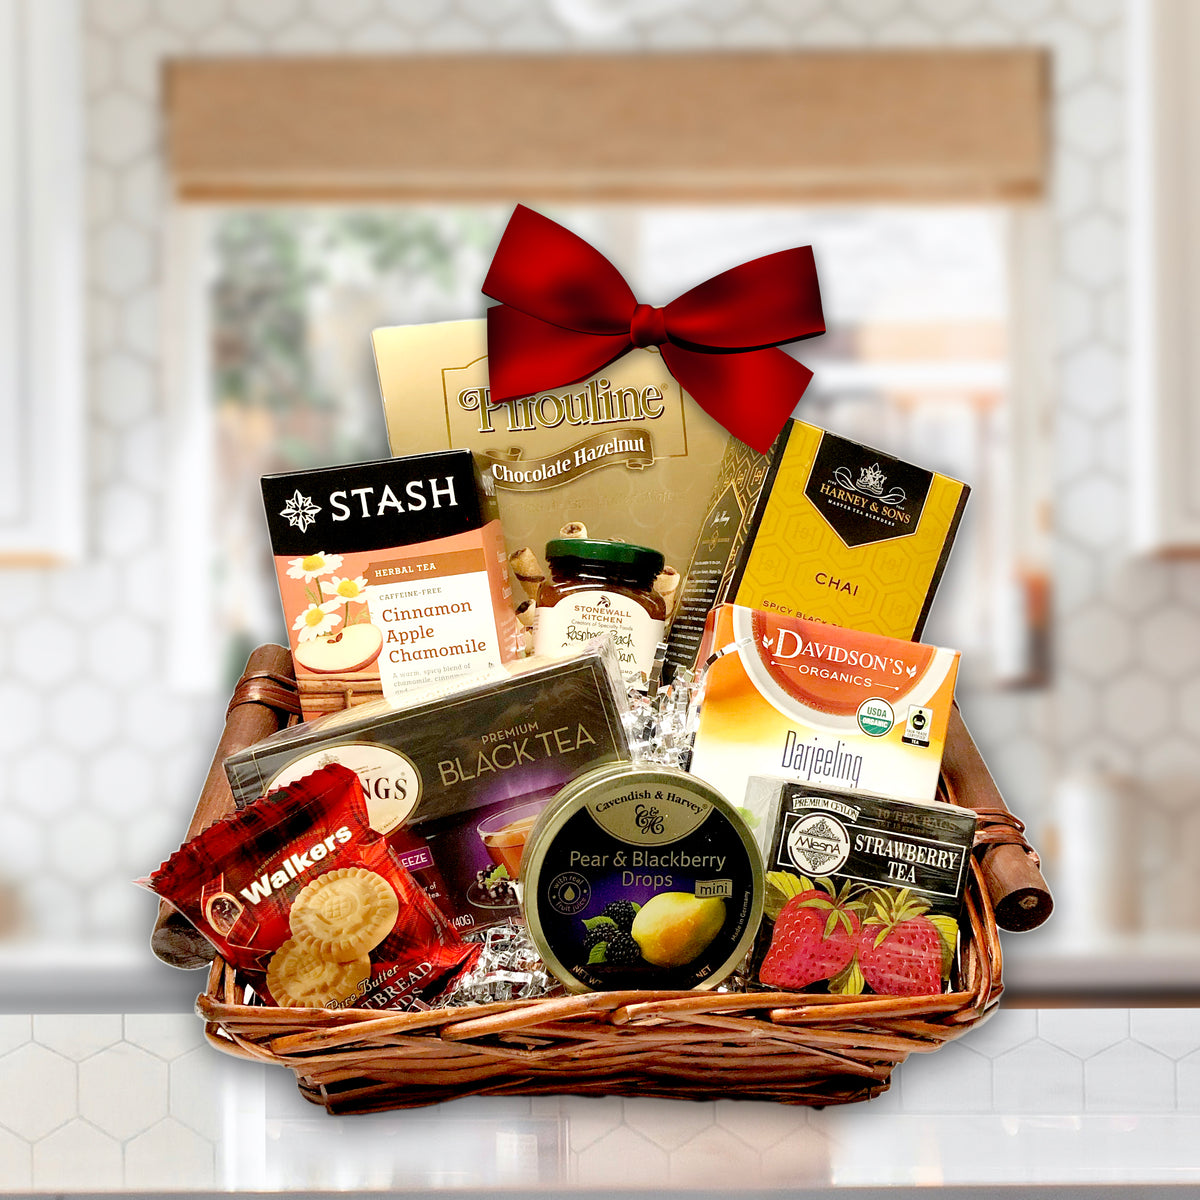 Surreal gifting starts here: Meet our all-natural basket hampers